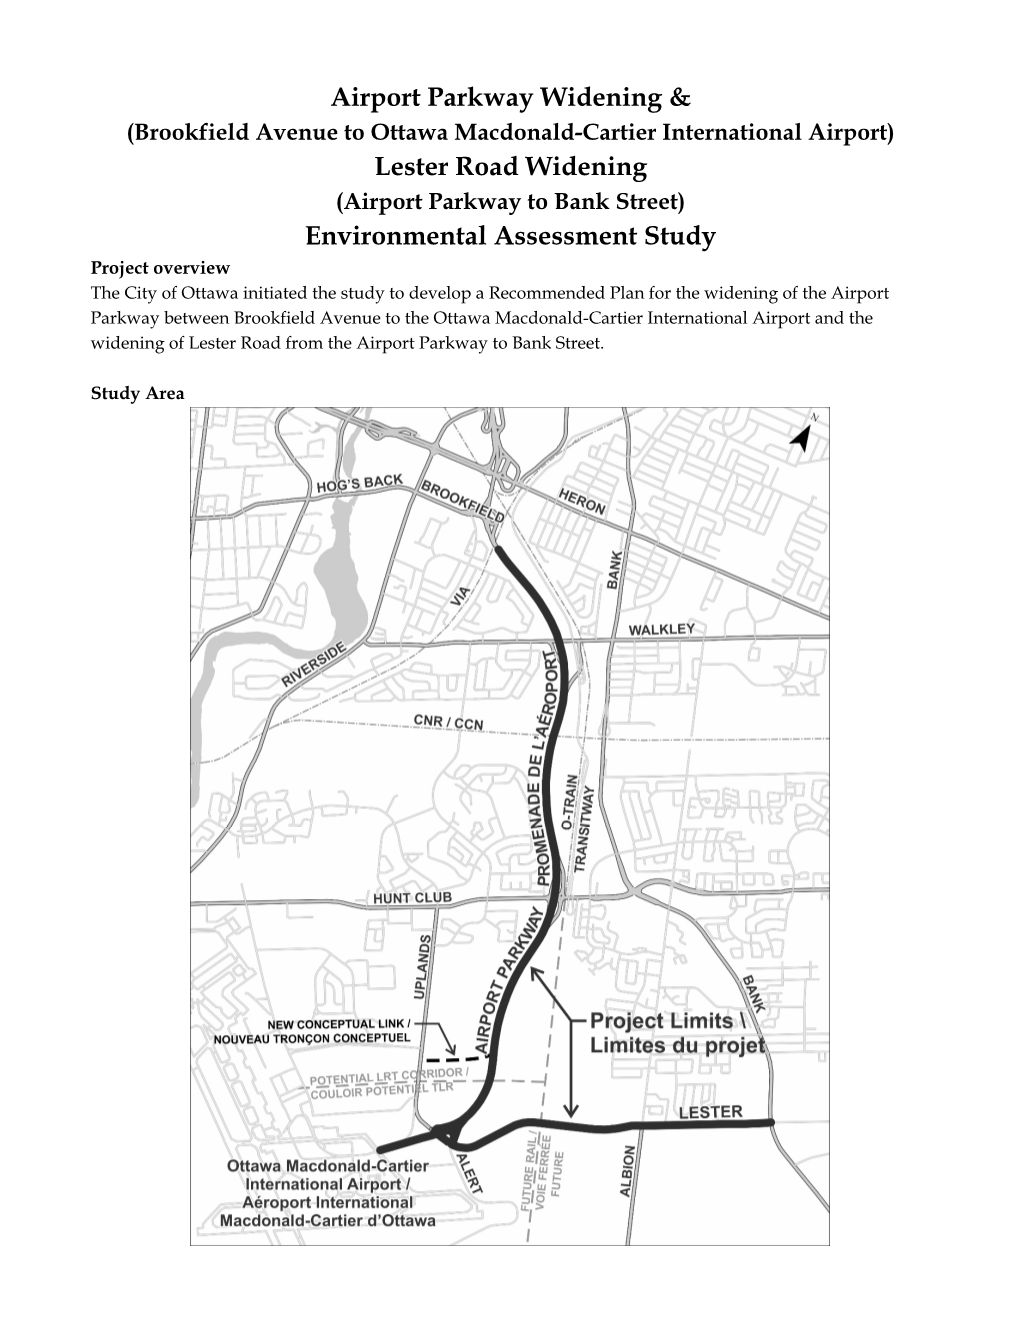 Airport Parkway Widening & Lester Road Widening Environmental Assessment Study